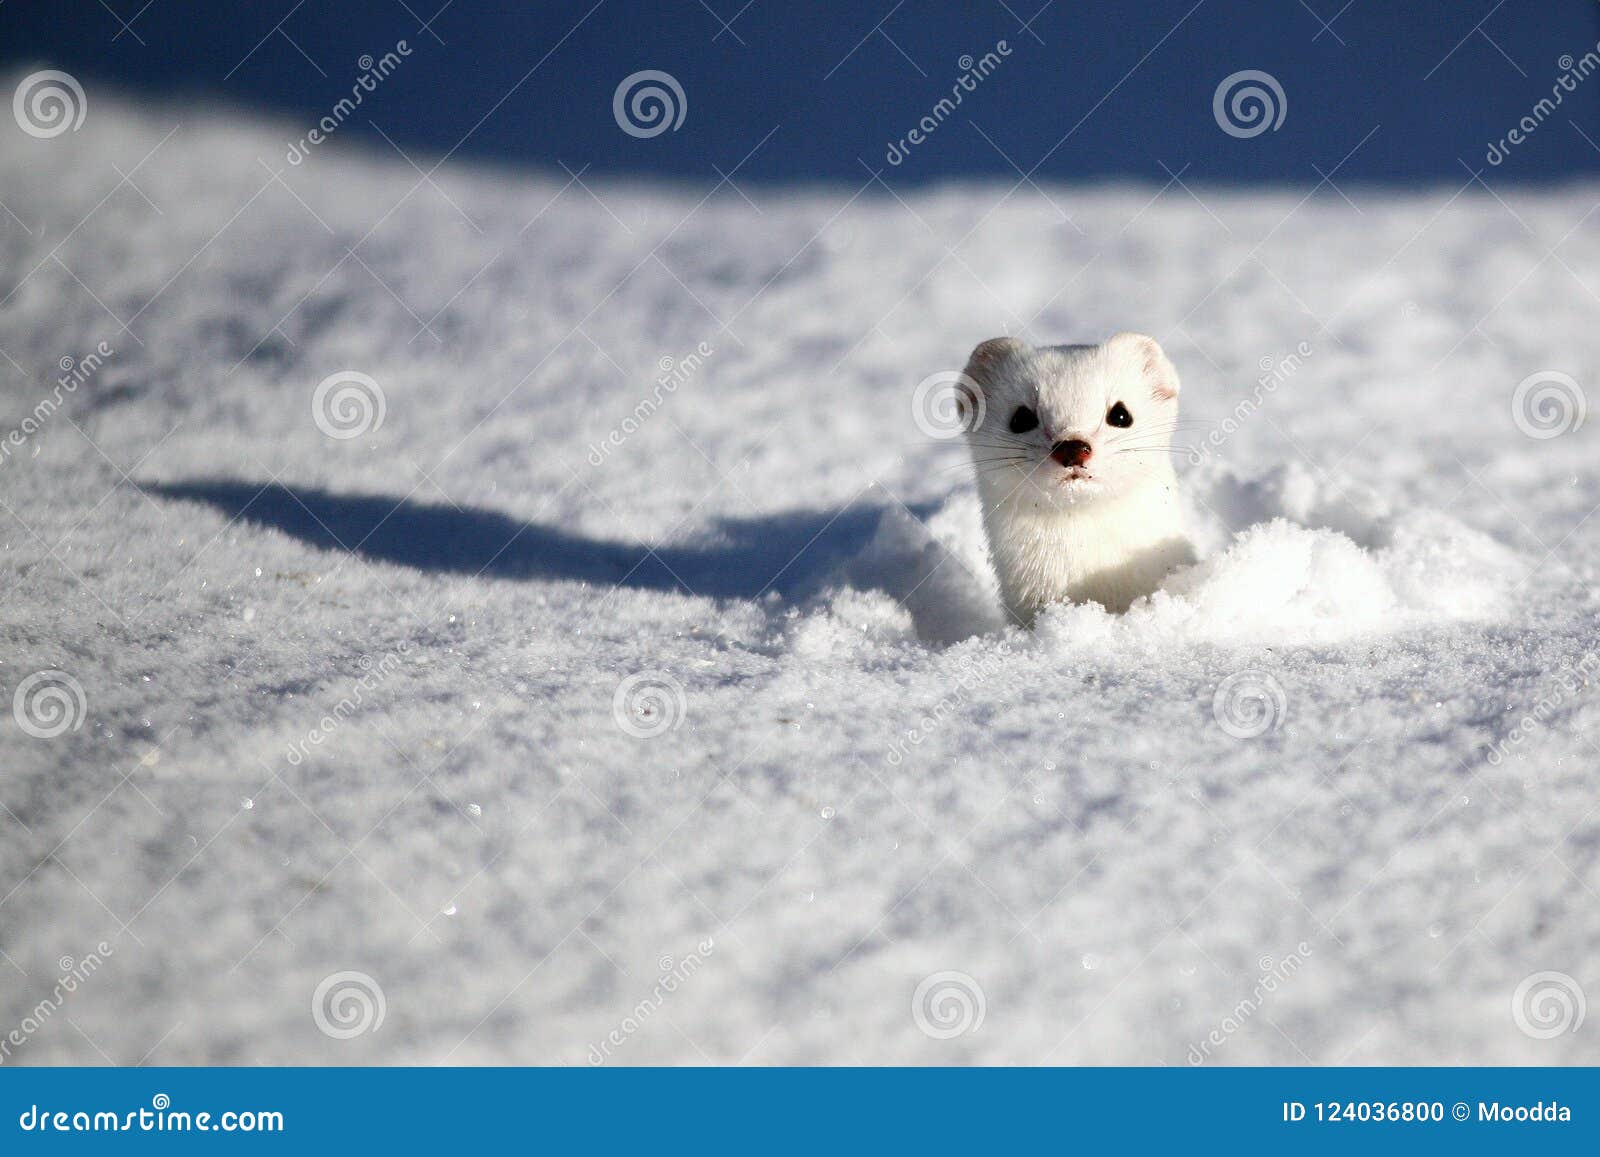 stoat mustela erminea also known as the short-tailed weasel